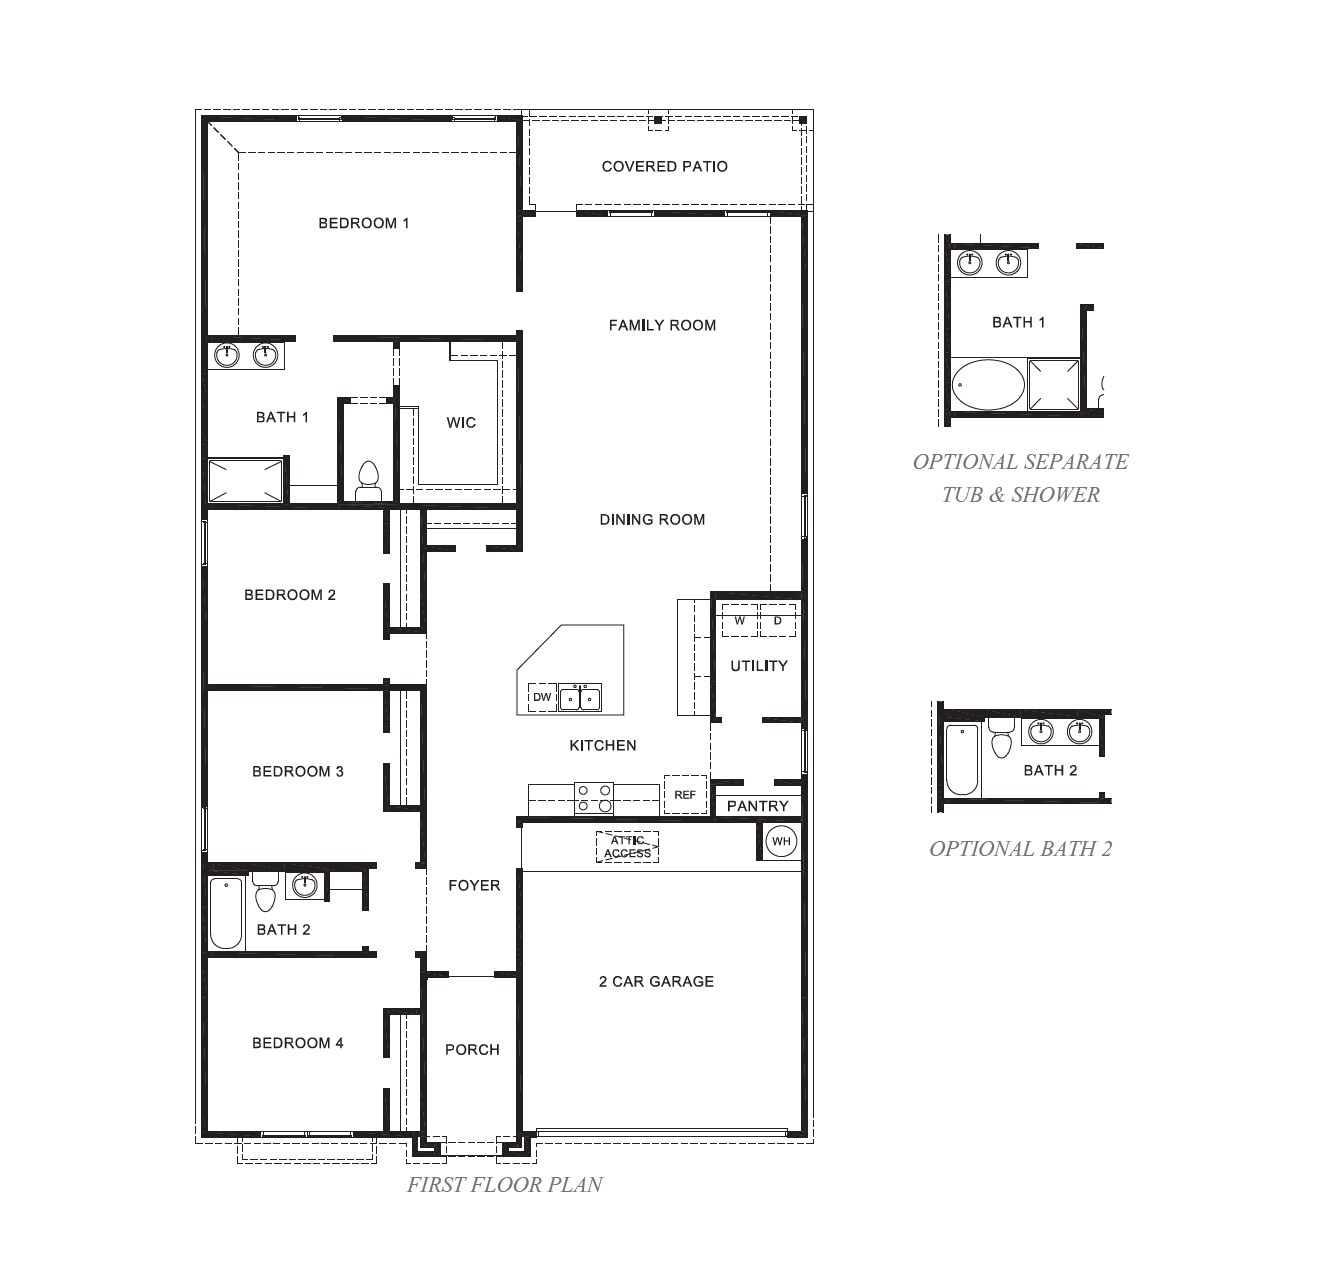 kingston floorplan with optional bath or separate tub and shower